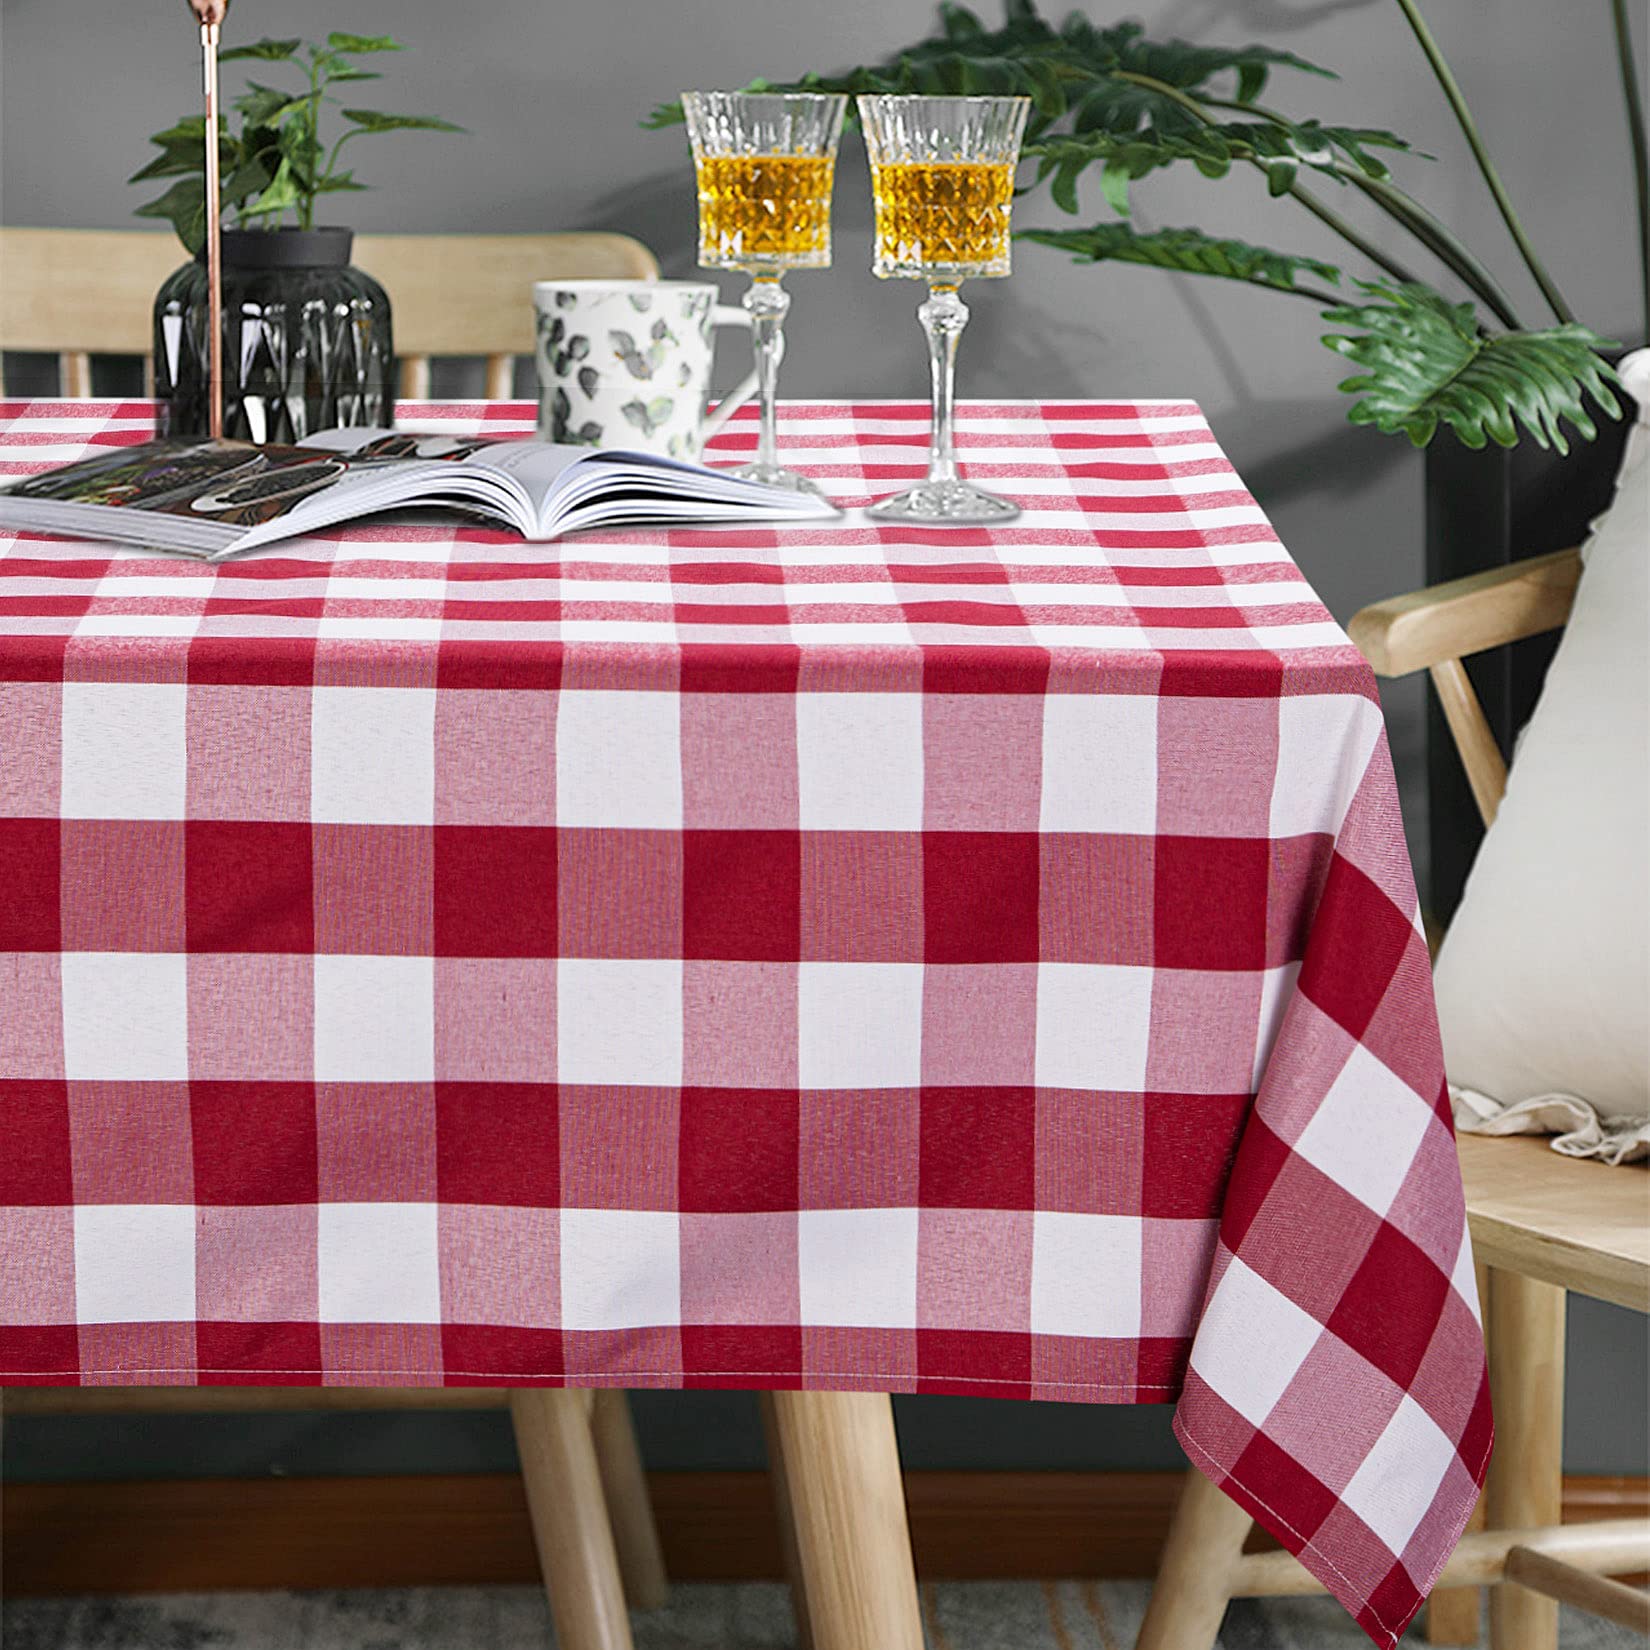 LinTimes Gingham Tablecloth Red Rectangle Checkered Tablecloth Wipeable Resistant Washable Plaid Table Cloth Cover, 55 x 79 Inch for Outdoor Picnic Kitchen Holiday Dinner，Red and White